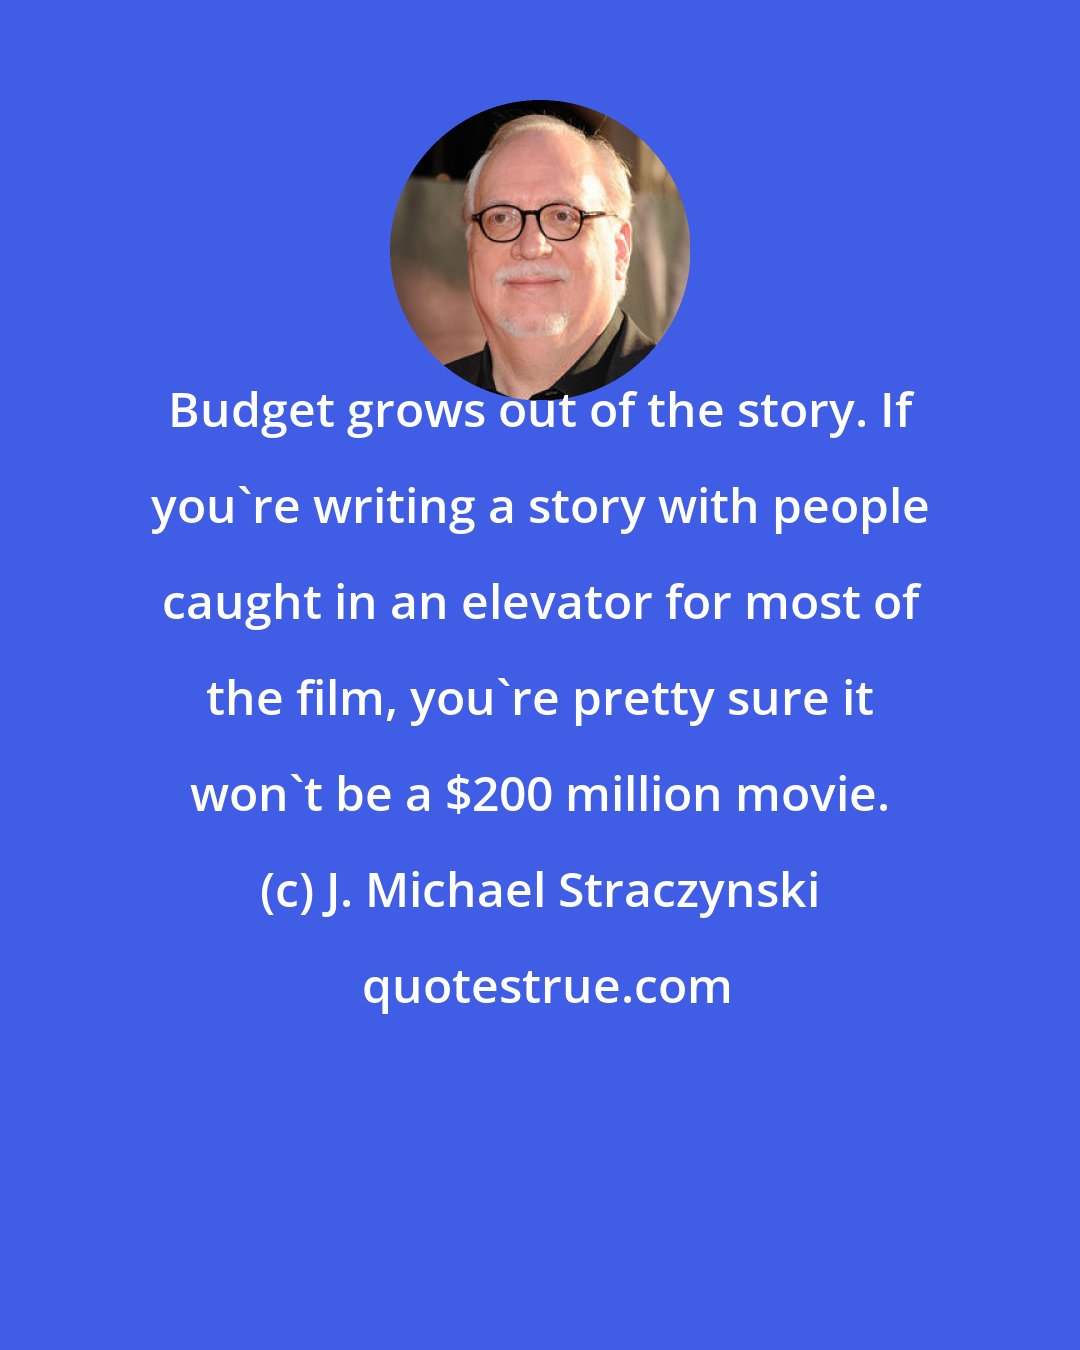 J. Michael Straczynski: Budget grows out of the story. If you're writing a story with people caught in an elevator for most of the film, you're pretty sure it won't be a $200 million movie.